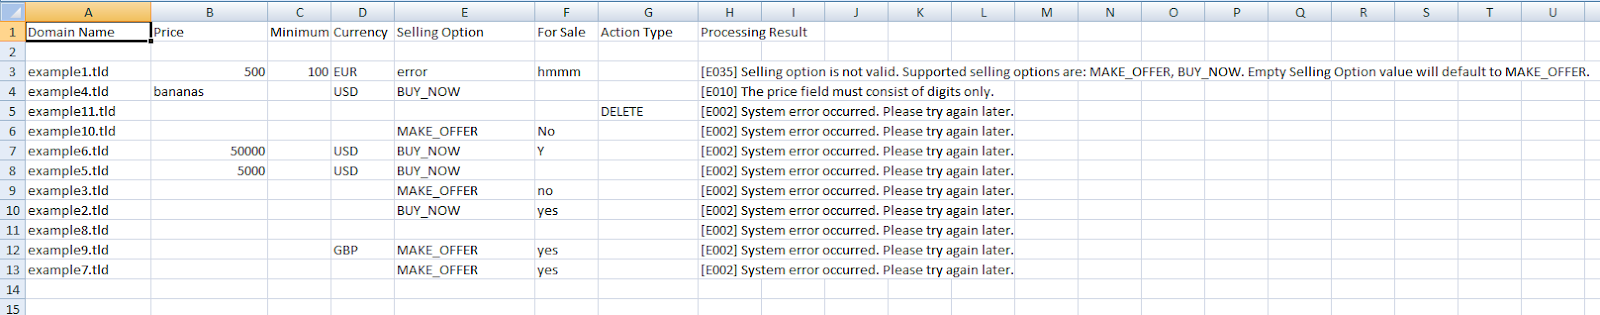 Marked errors in your file looks like this